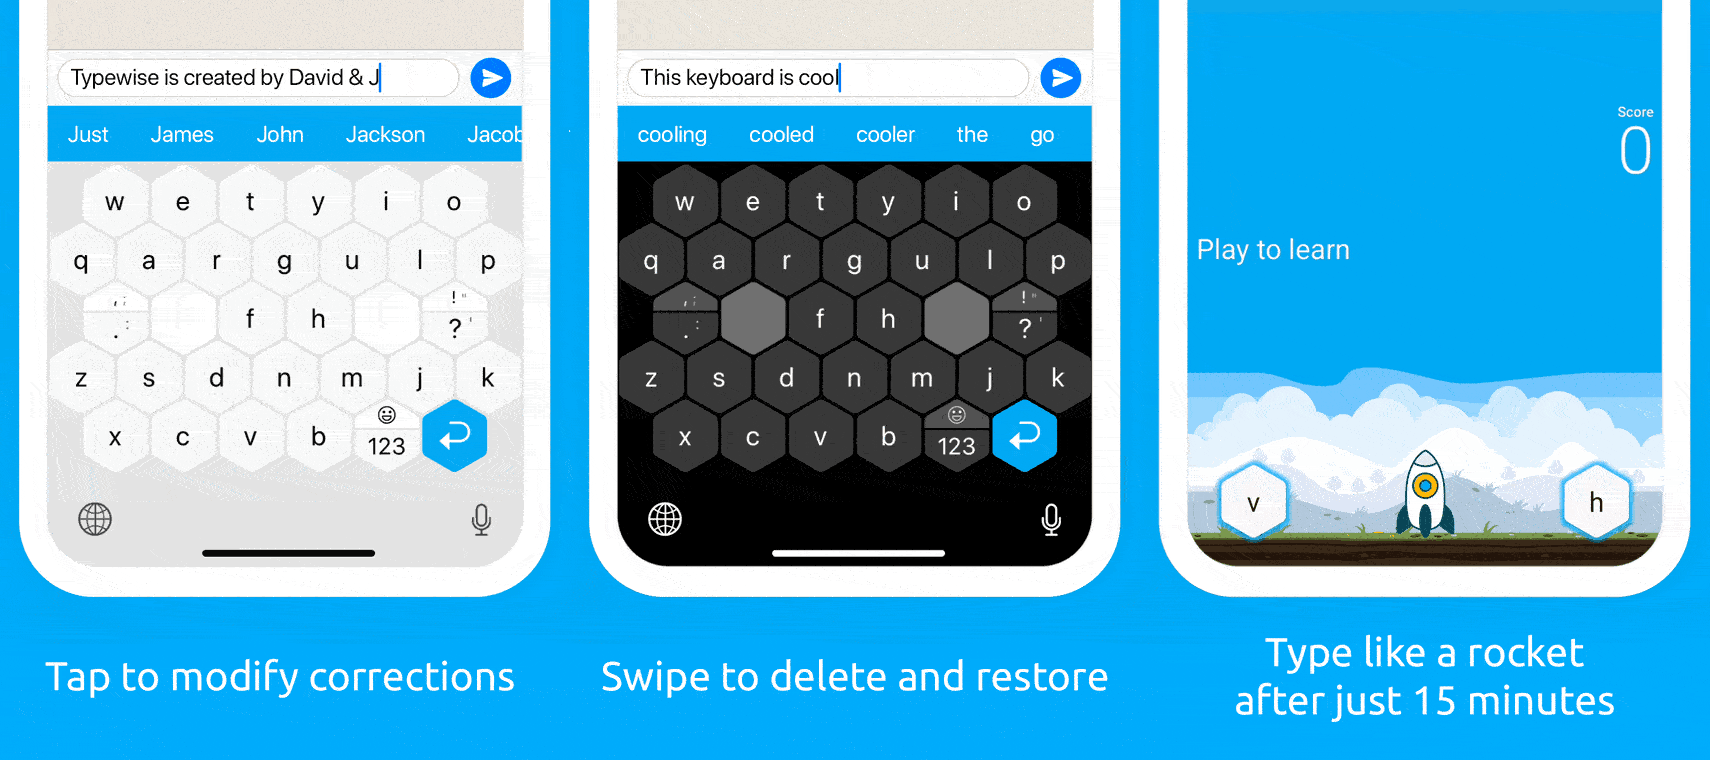 TypeWise Keyboard Top 10 Unique & Best Free Android Apps October 2019